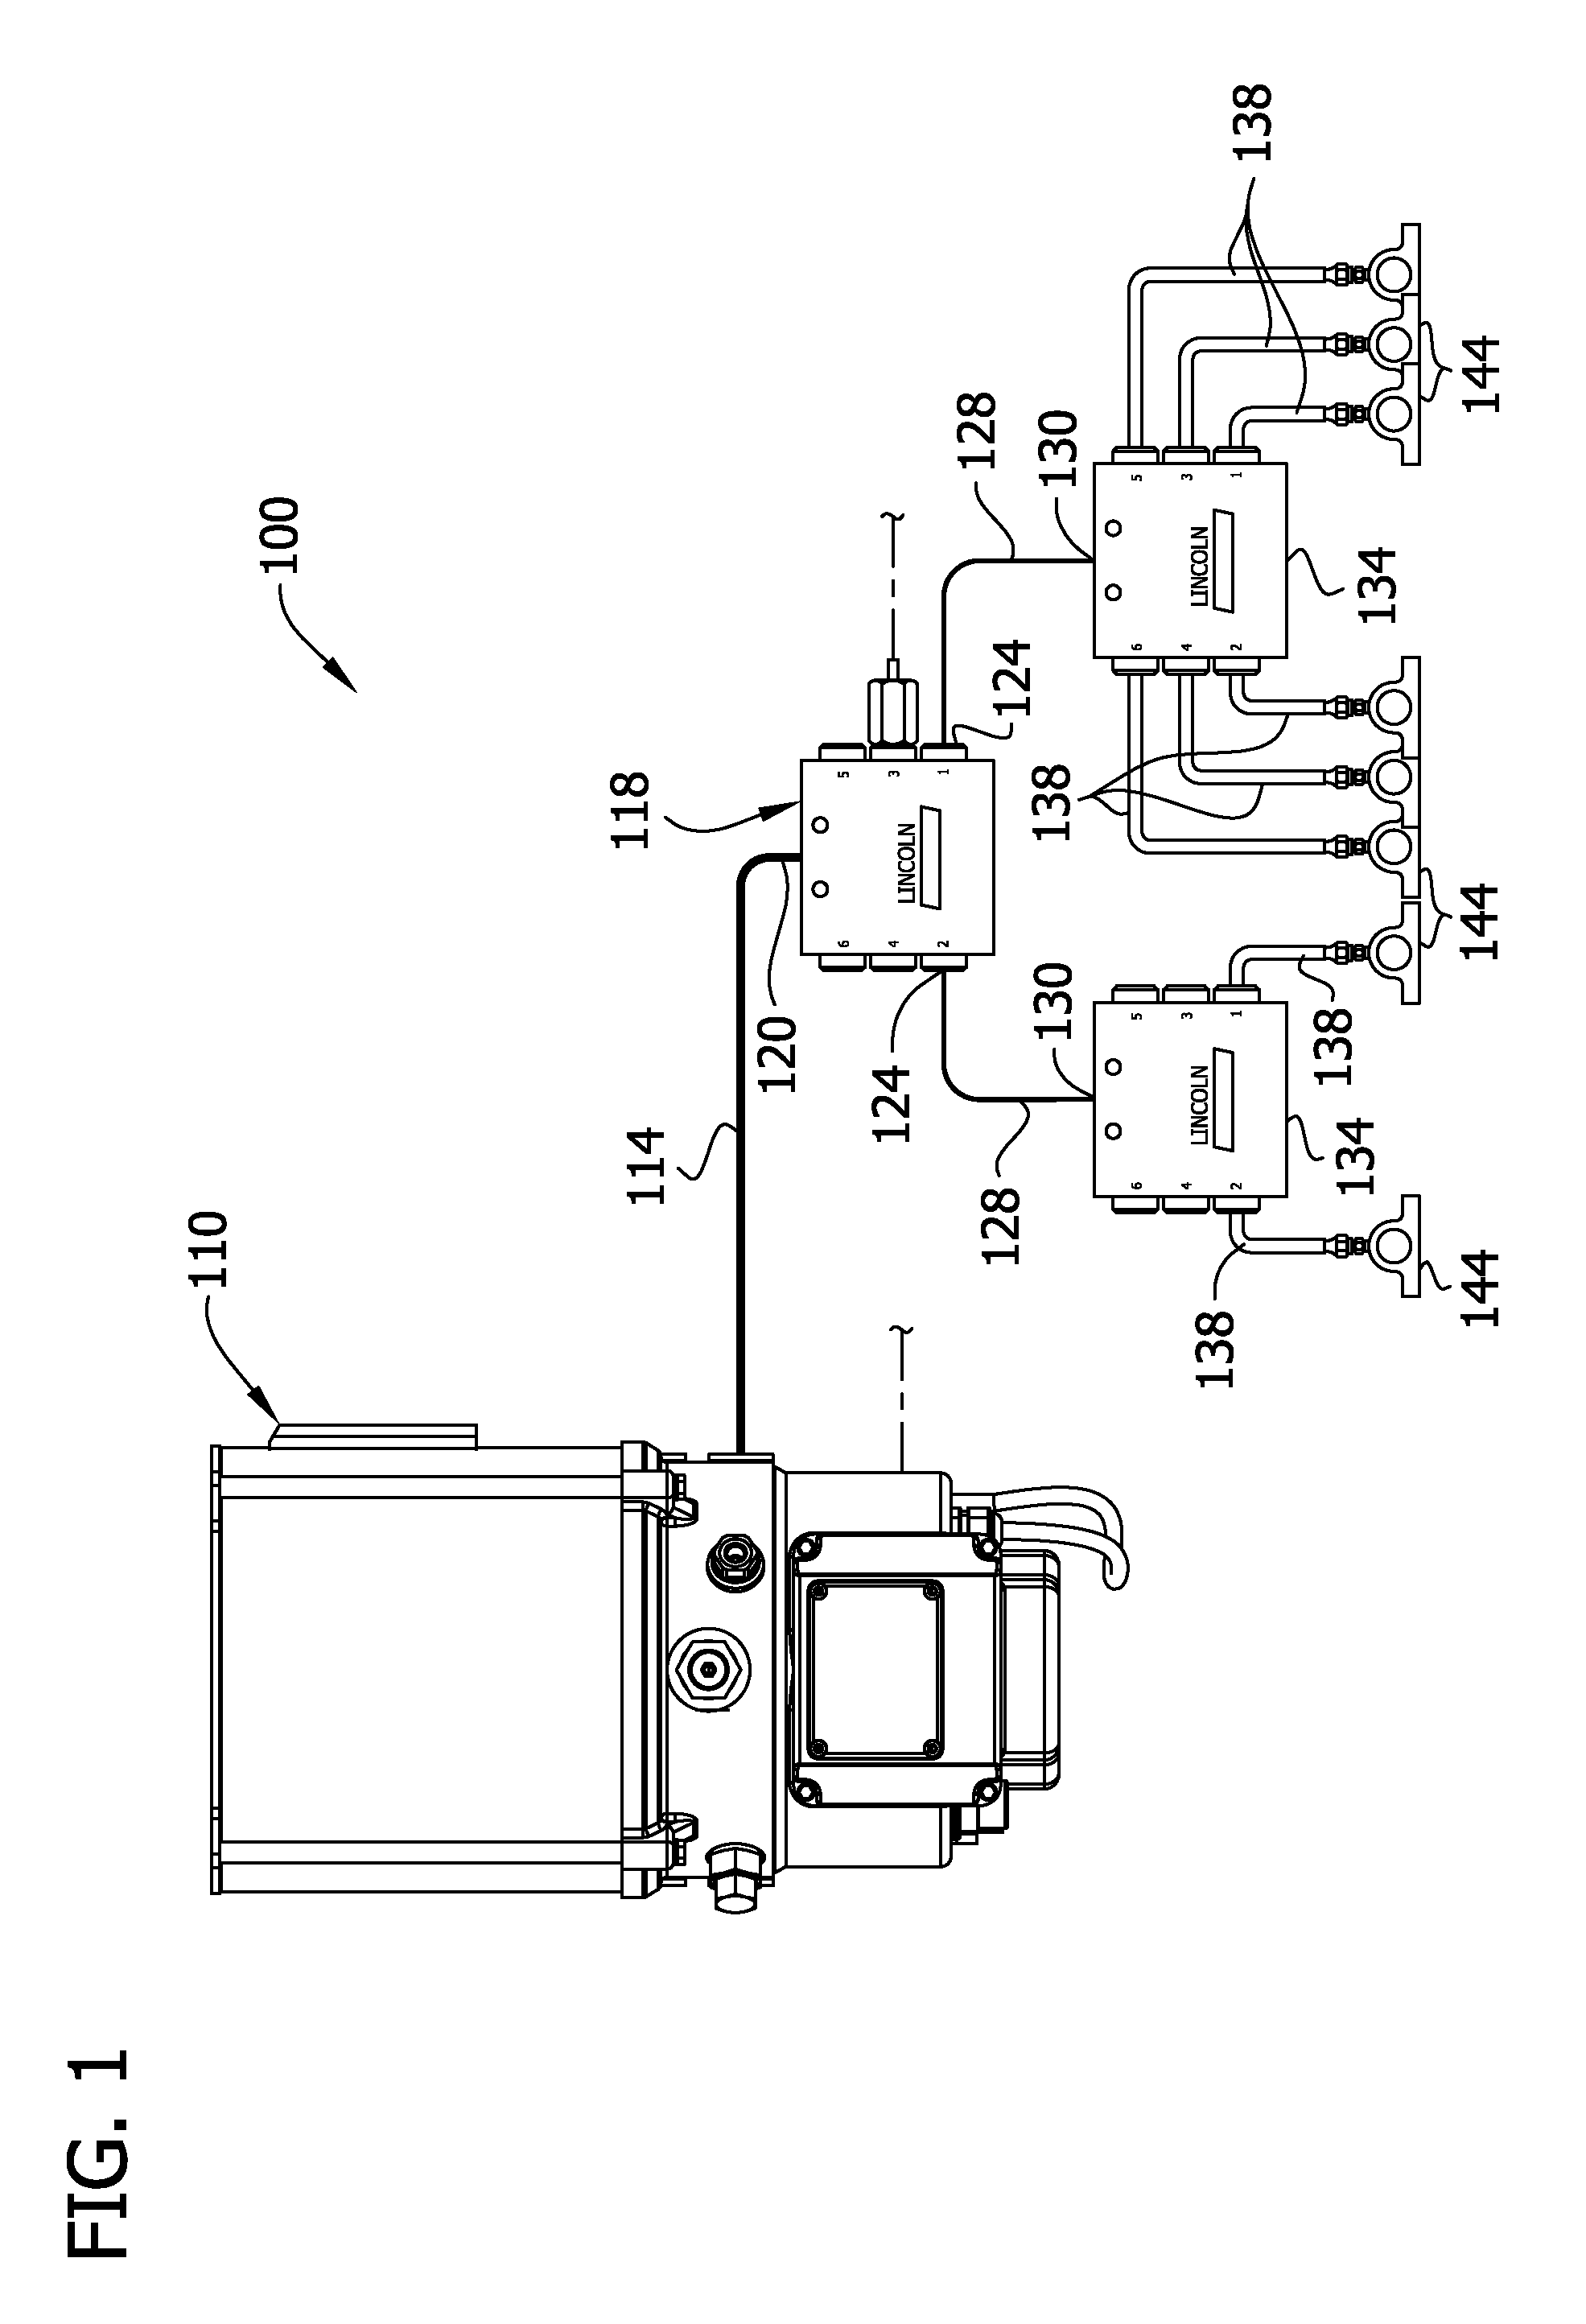 Apparatus and method for controlling a lubriation unit using flow rate feedback